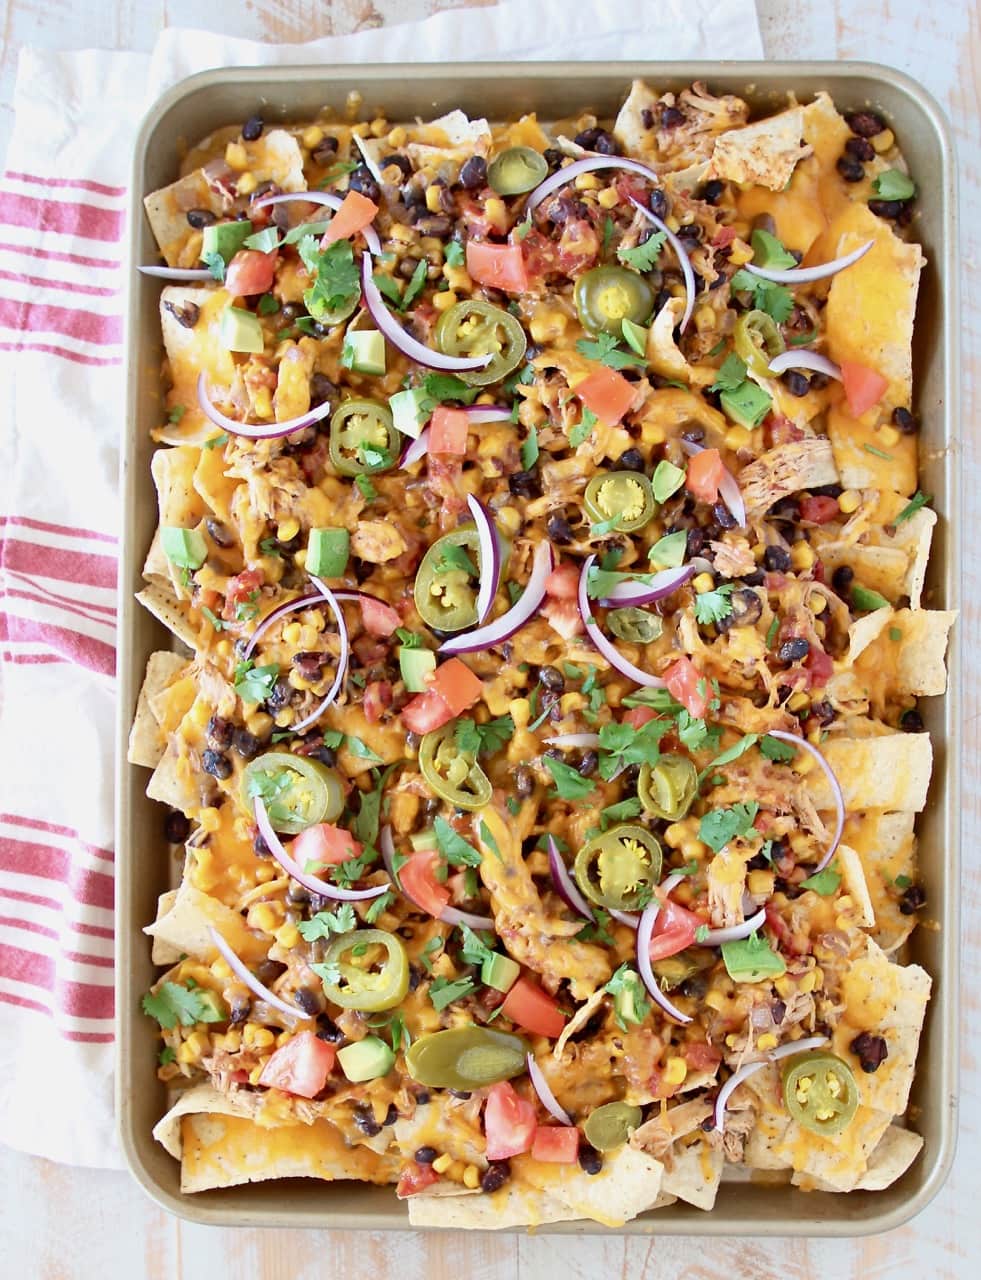 Sheet pan of chicken nachos topped with cheese, tomatoes, avocado, onions and jalapenos on red and white striped towel